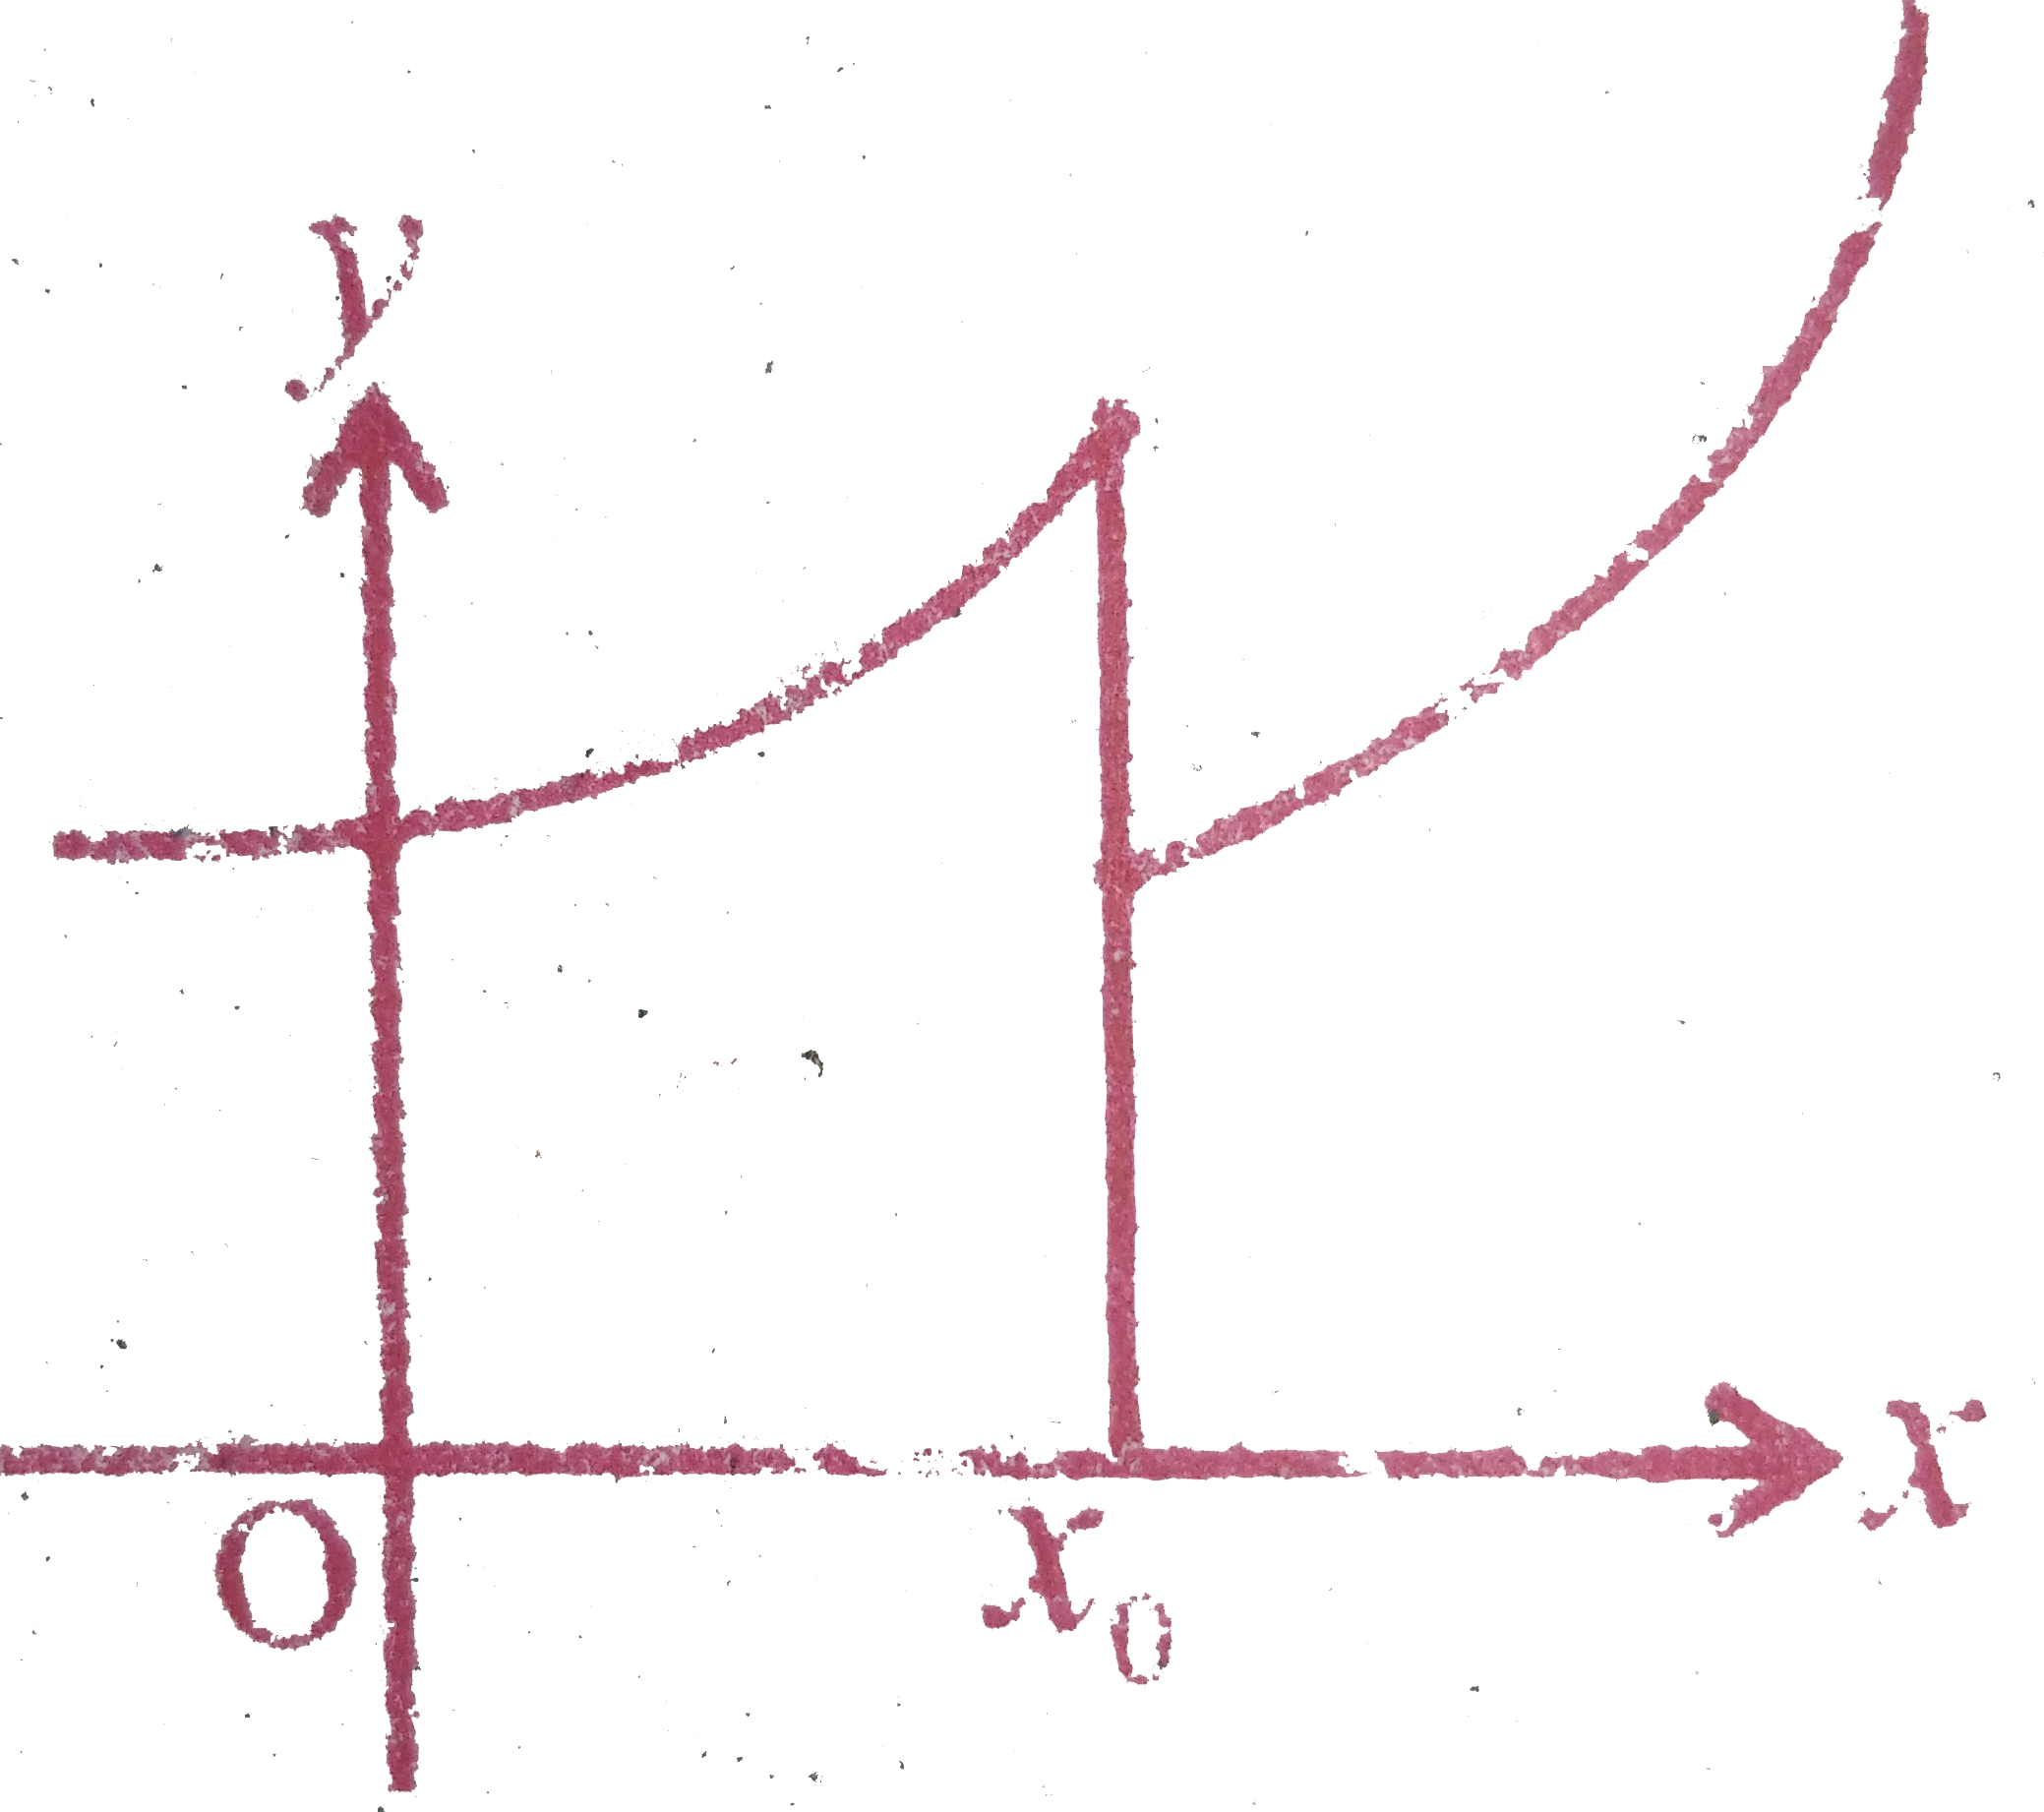 State how continuity is destroyed at x=x0  for each of the following graphs.